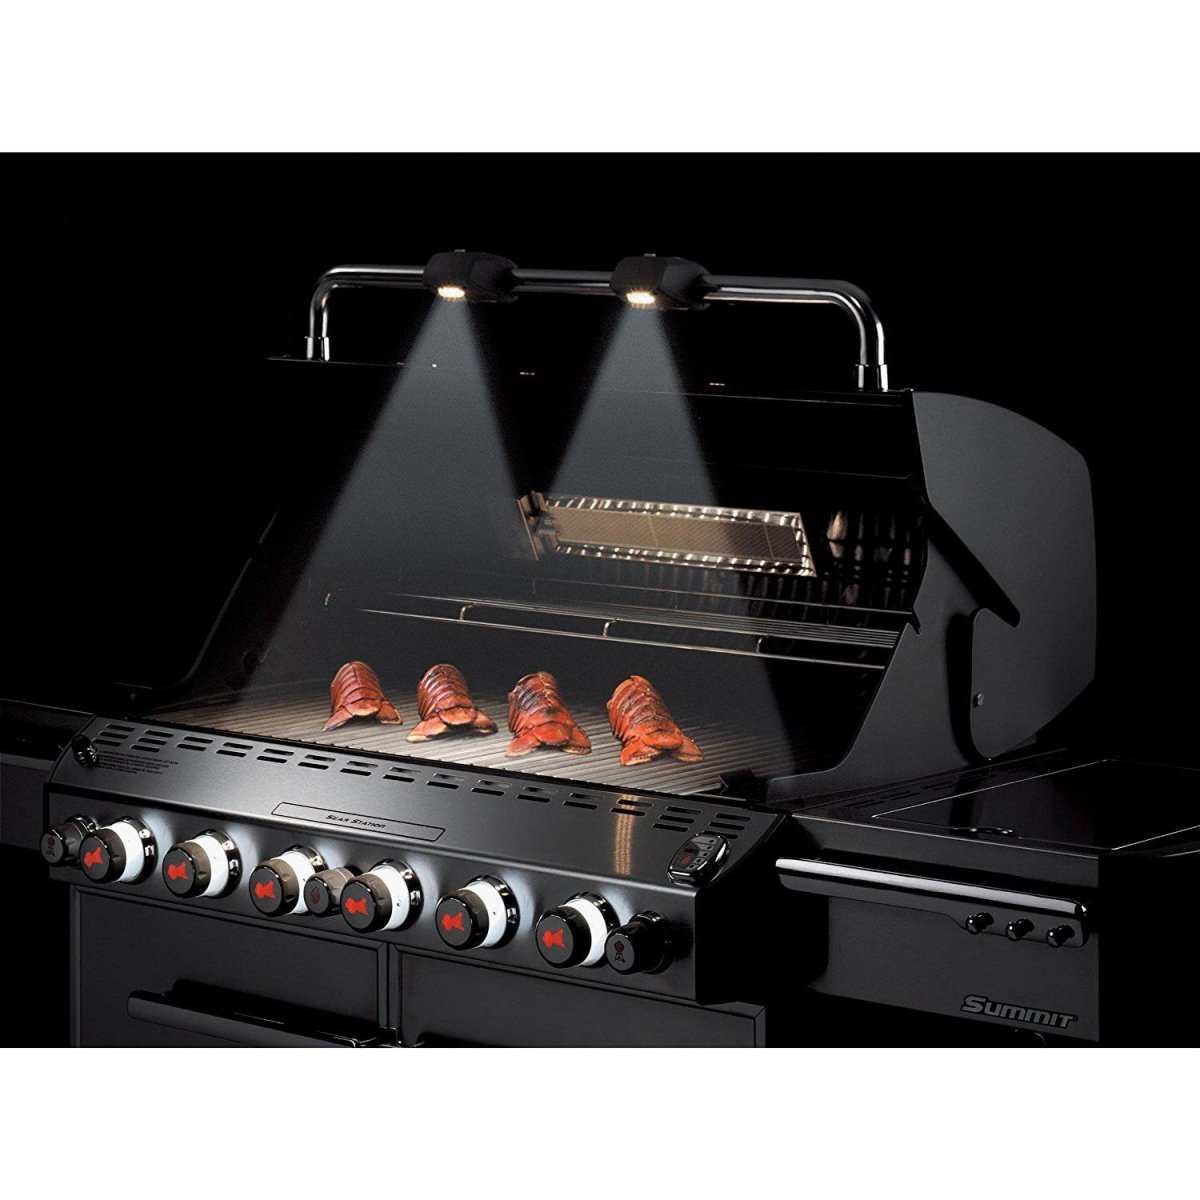 Weber Summit S-670 SS Gas Grill - Texas Star Grill Shop 7370001